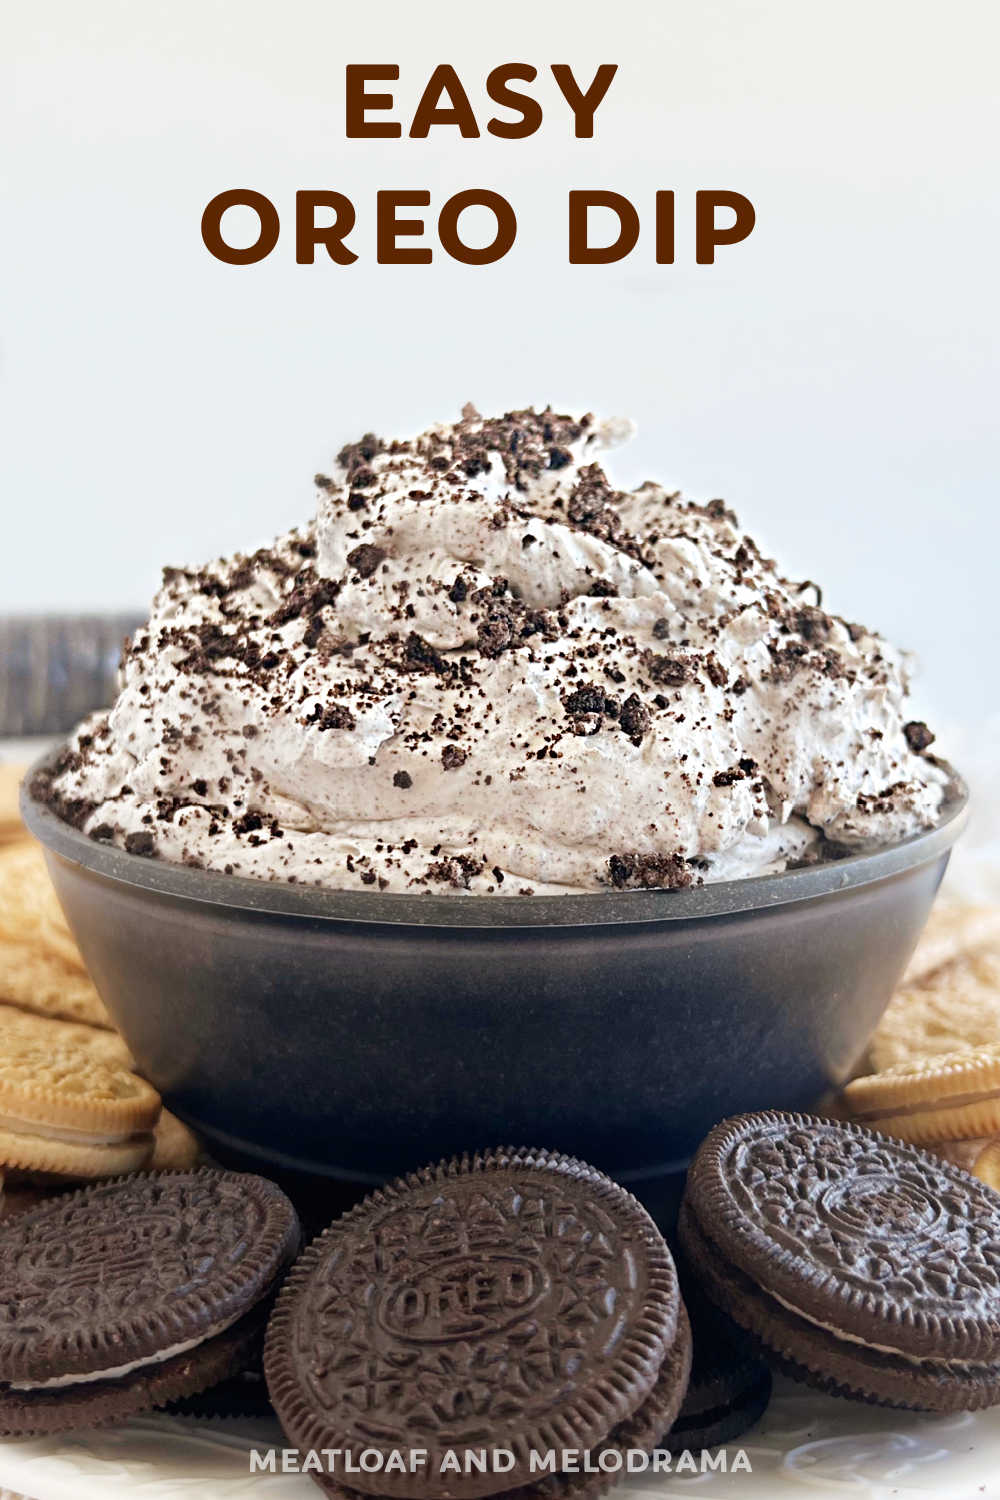 Oreo Dip or Cookies and Cream dip is an easy recipe made with cream cheese, Cool Whip, powdered sugar and crushed Oreos. Everyone loves this delicious dessert dip -- just serve with your favorite dippers! via @meamel